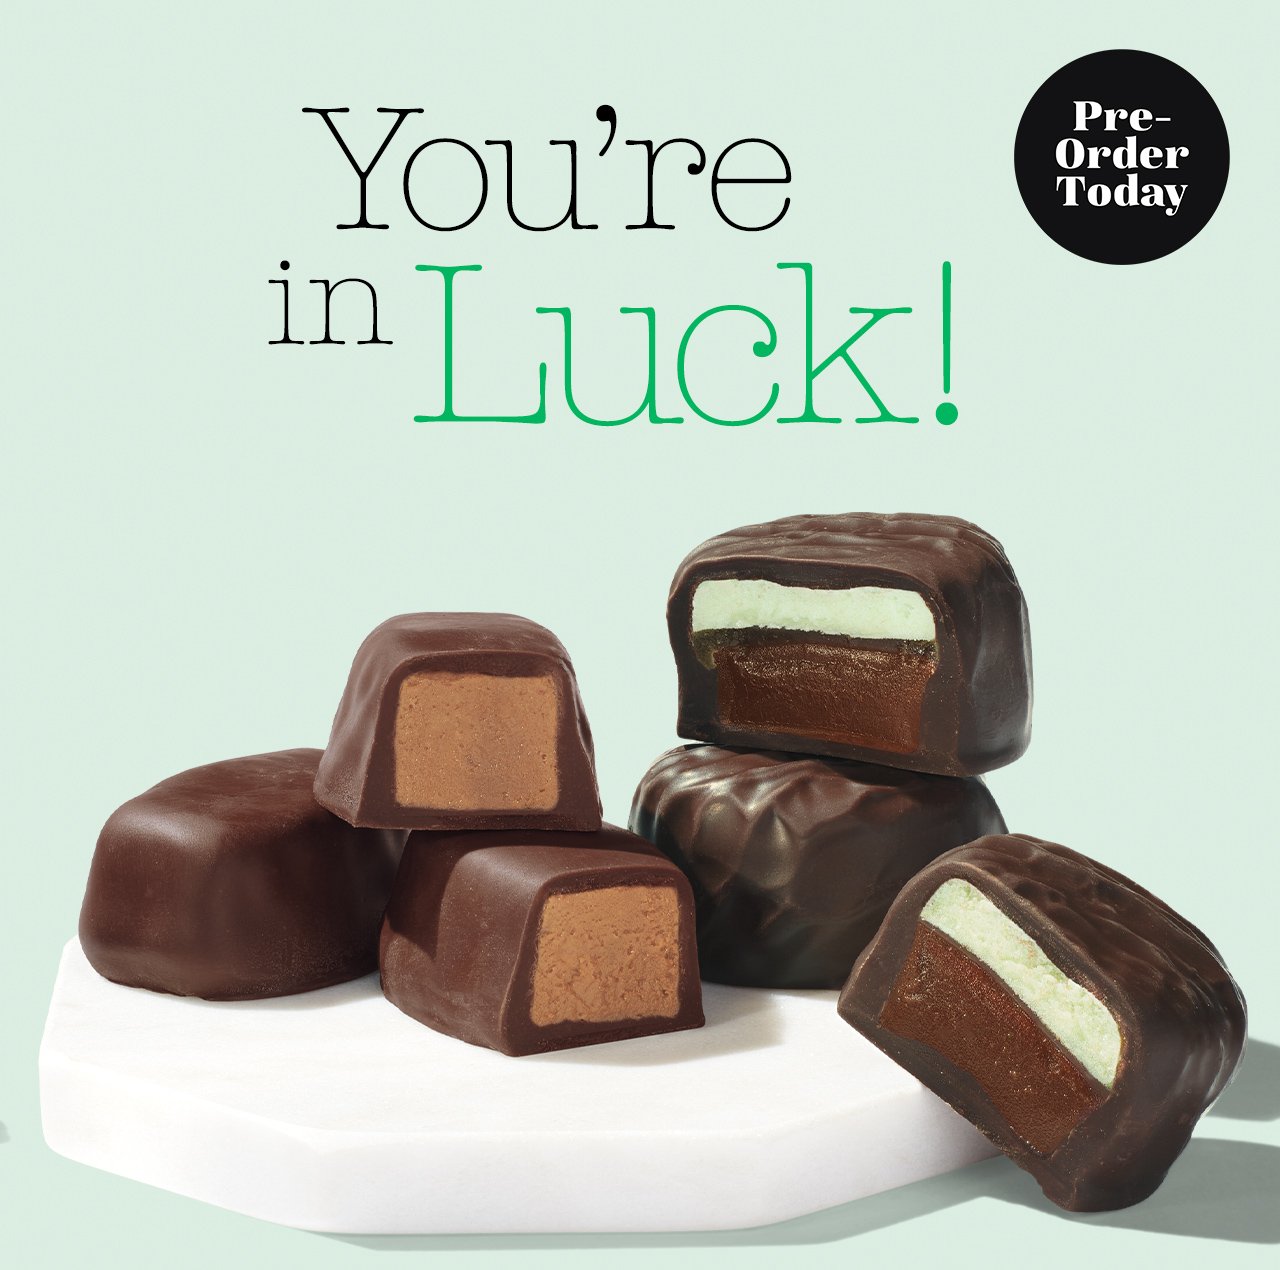 You’re in Luck! Pre-Order Today: Irish Cream and Dark Mint Scotchmallow